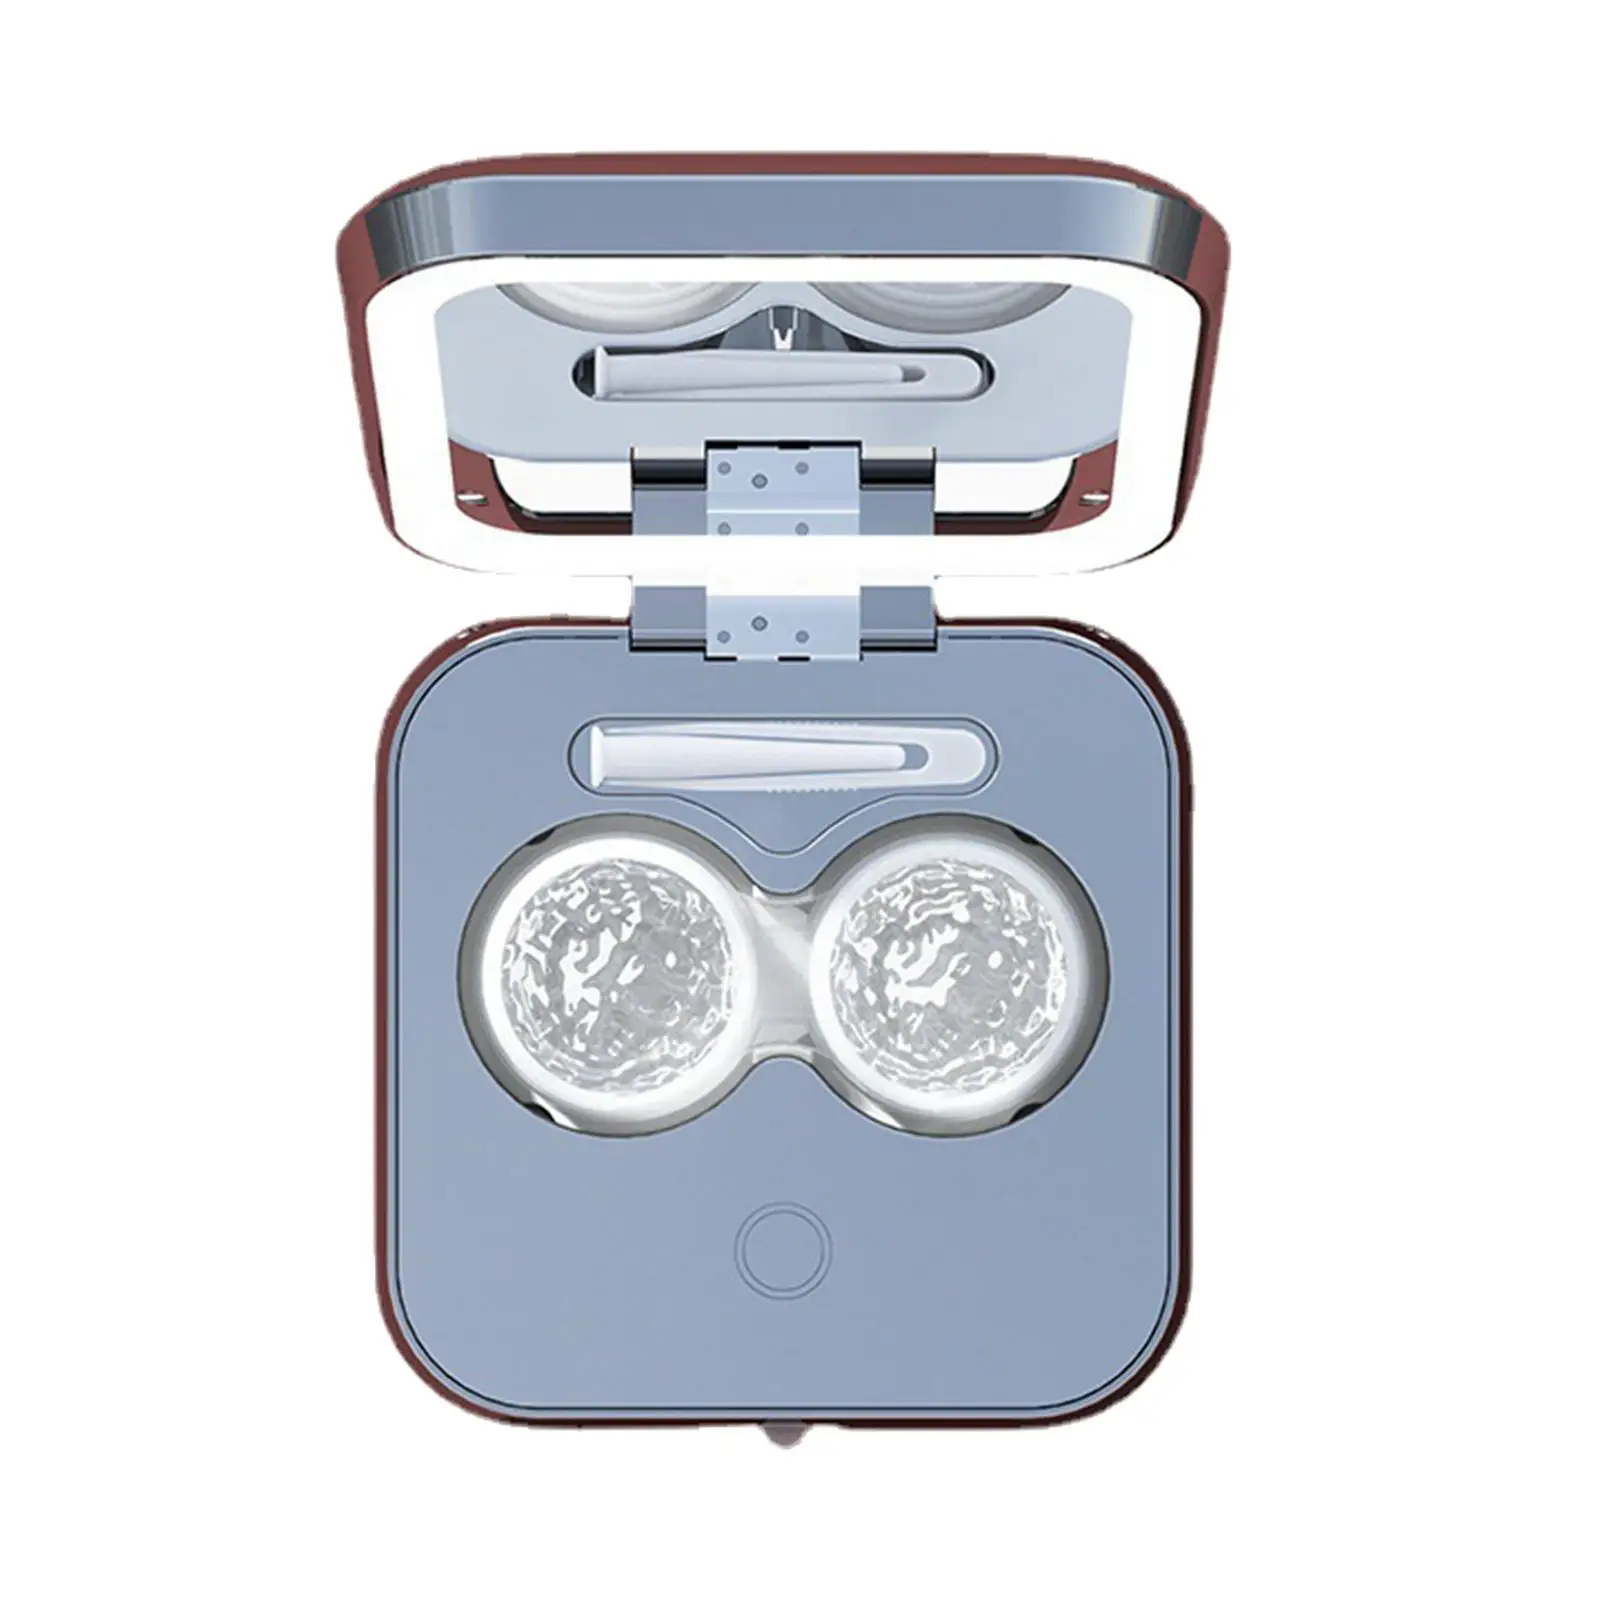 Contact Lens Ultrasonic Cleaning Machine Rechargeable Holder with Mirror Tweezers Eye Contact Lens Case Cleaning Tool Adults Men